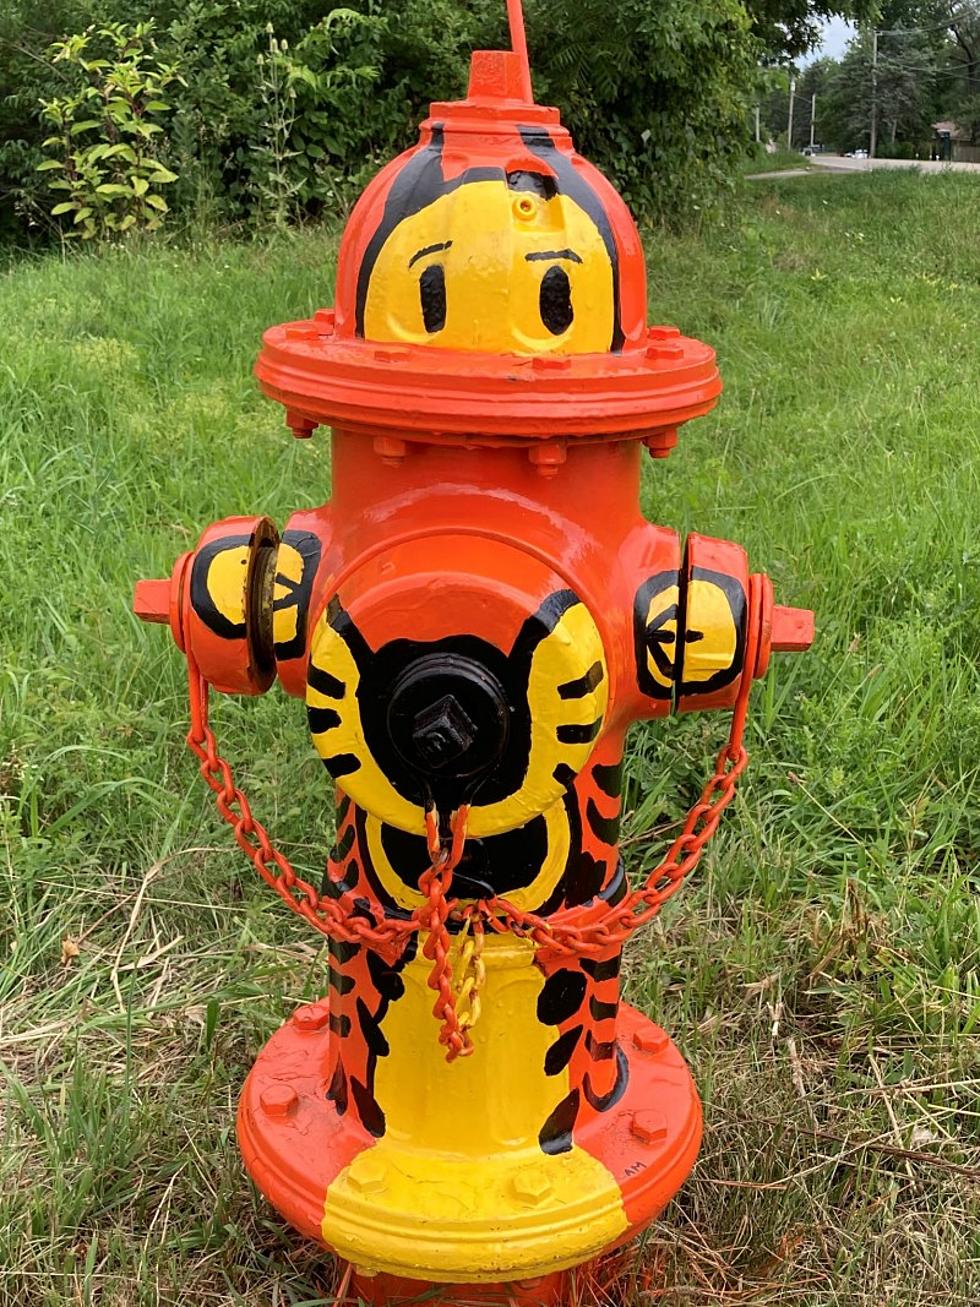 Have You Seen These Cool, Painted Fire Hydrants in Cherry Valley?